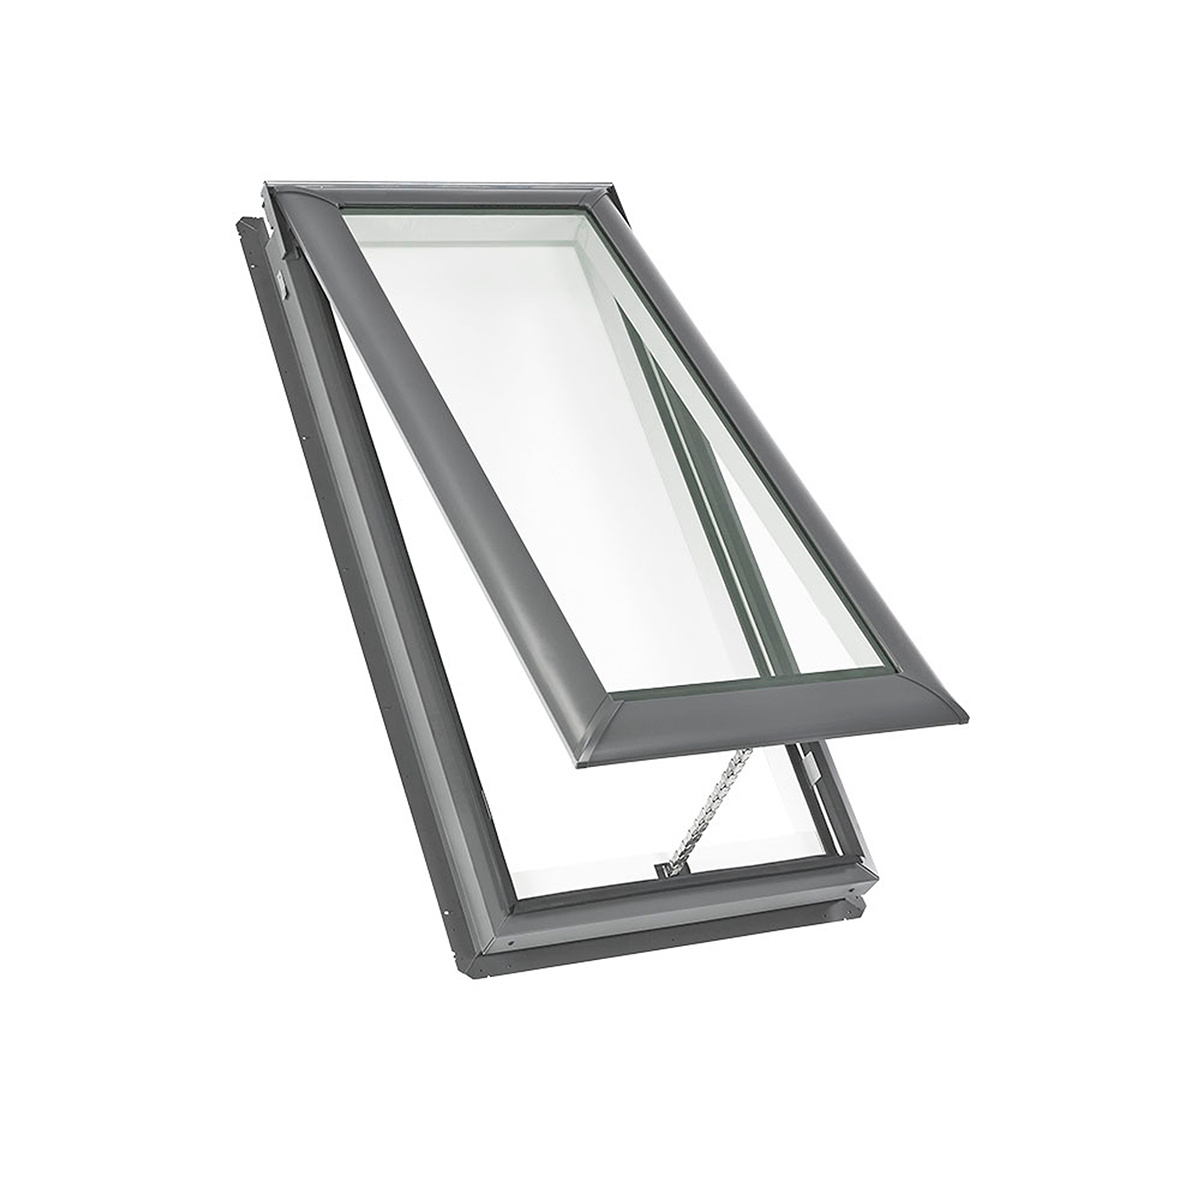 Manual Deck-Mount Skylight with Laminated Low-E3 Glass - 30-1/16 in. x 37-7/8 in. - VS M04